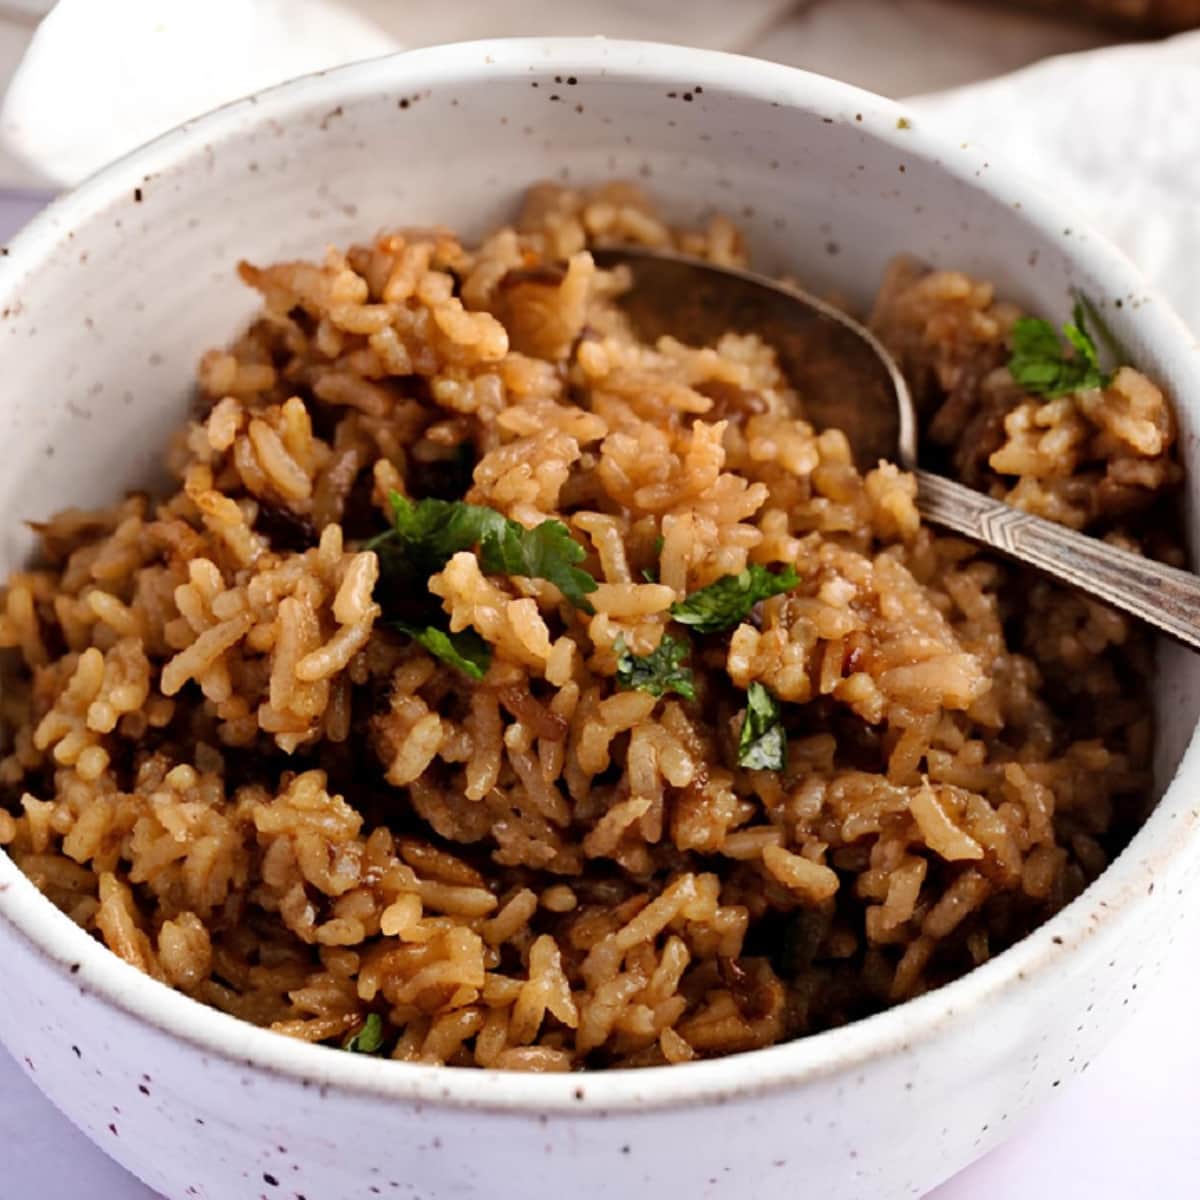 Angled view of brown colored stick of butter rice, with a spoon, topped with few parsley leaves